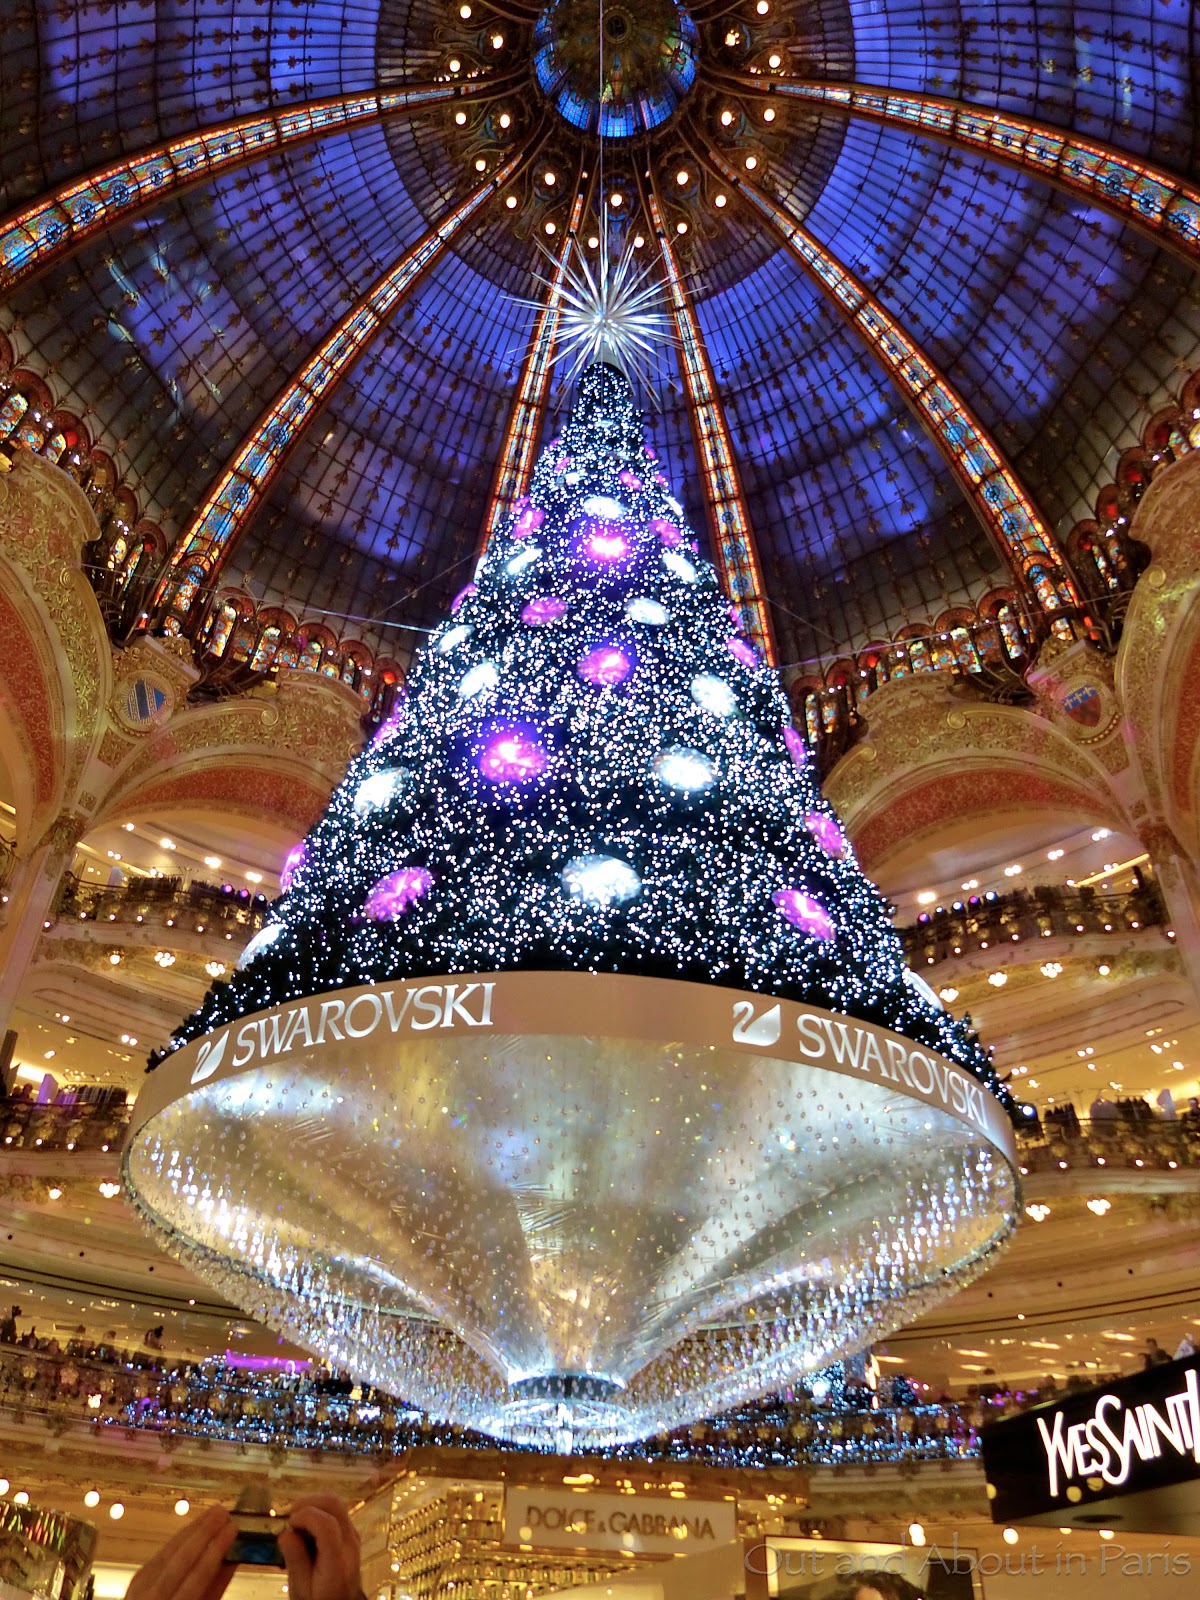 Louis Vuitton designs the holiday windows at Galeries Lafayette